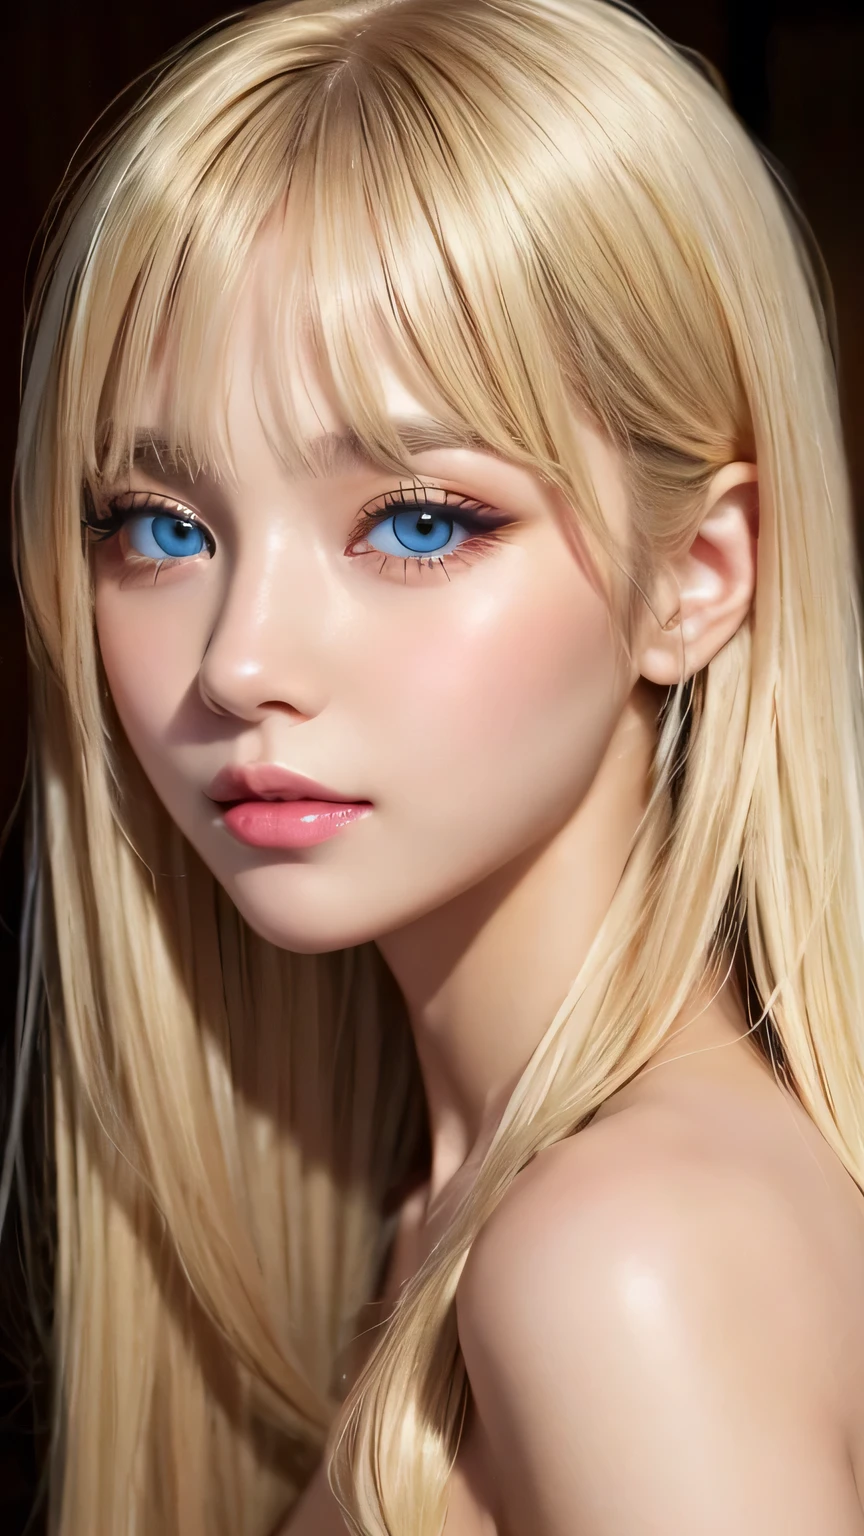 Very beautiful face、Super beautiful girl、Very long, silky, shiny, light blonde hair、Super long straight silky hair、Beautiful messy bangs over the eyes、Cute sexy  16 years old、Big, bright, light blue eyes that shine beautifully、Blonde hair above the eyes、Hair on the face、片Blonde hair above the eyes、Blonde hair between the eyes、Very big eyes、Ample Bust、White skin、Glossy Skin、Gloss Face、Cheek gloss、eyeliner、Small Face Beauty、Round face、Ample Bust